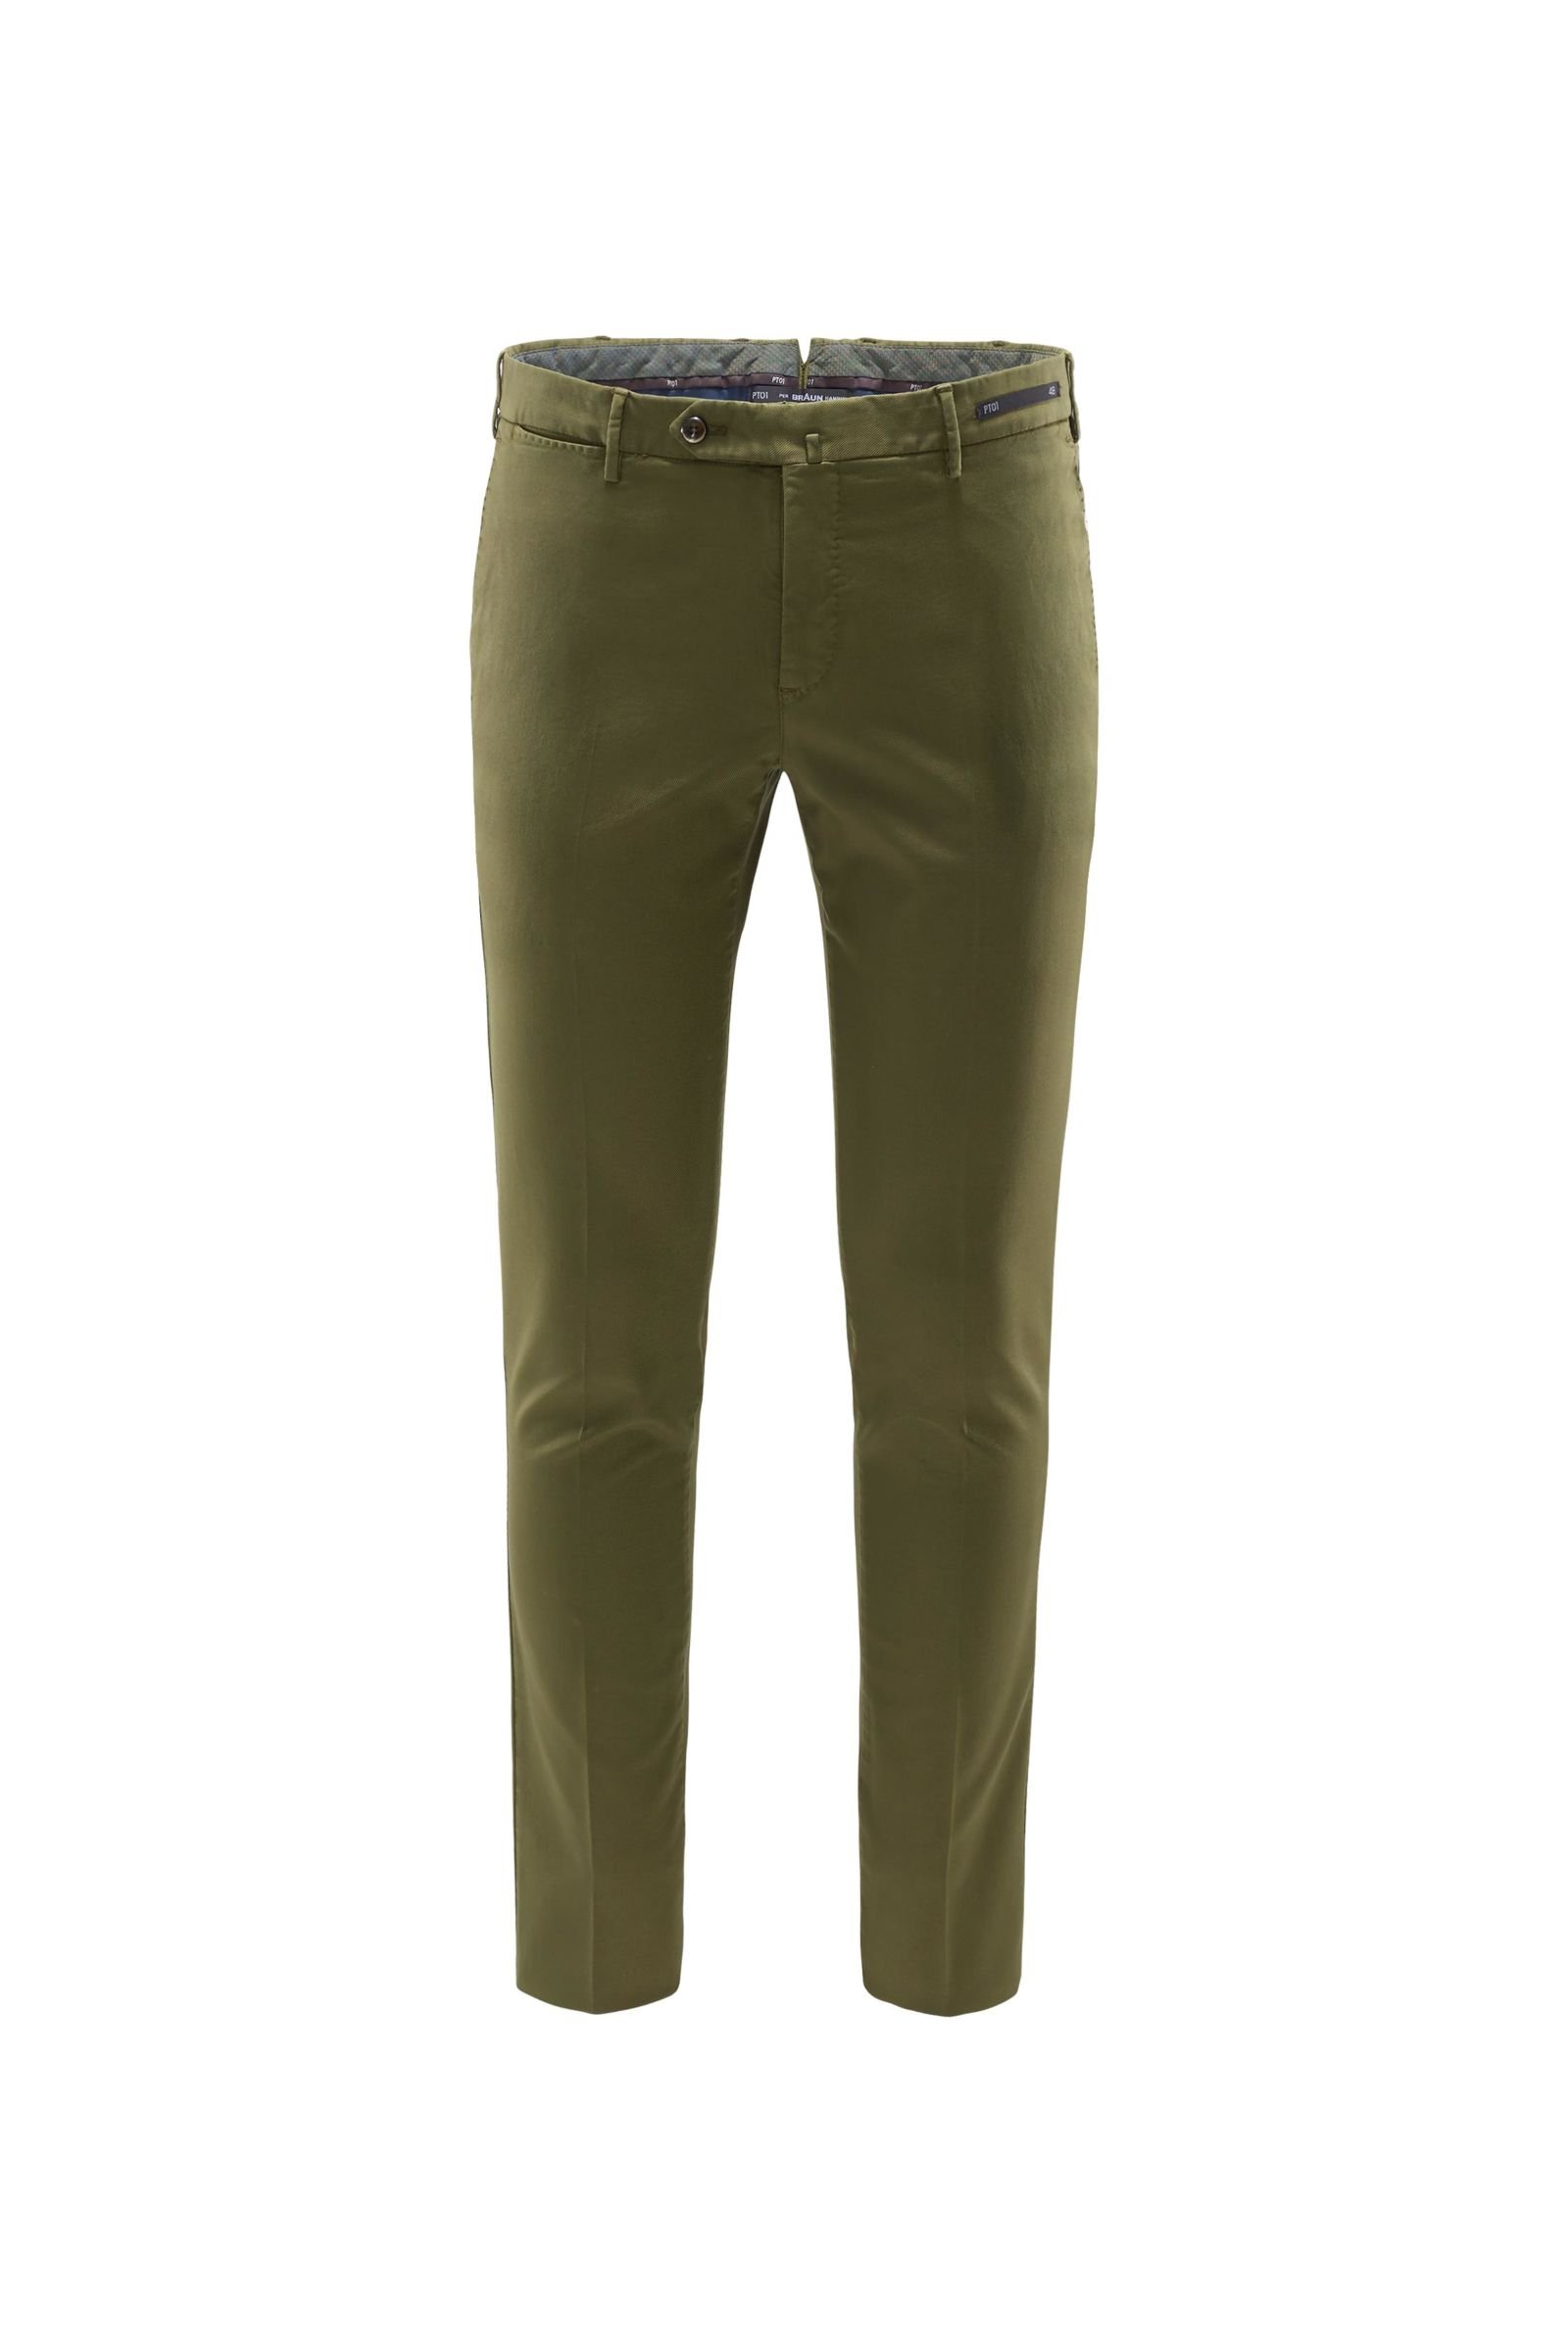 Trousers 'Evo Fit' olive